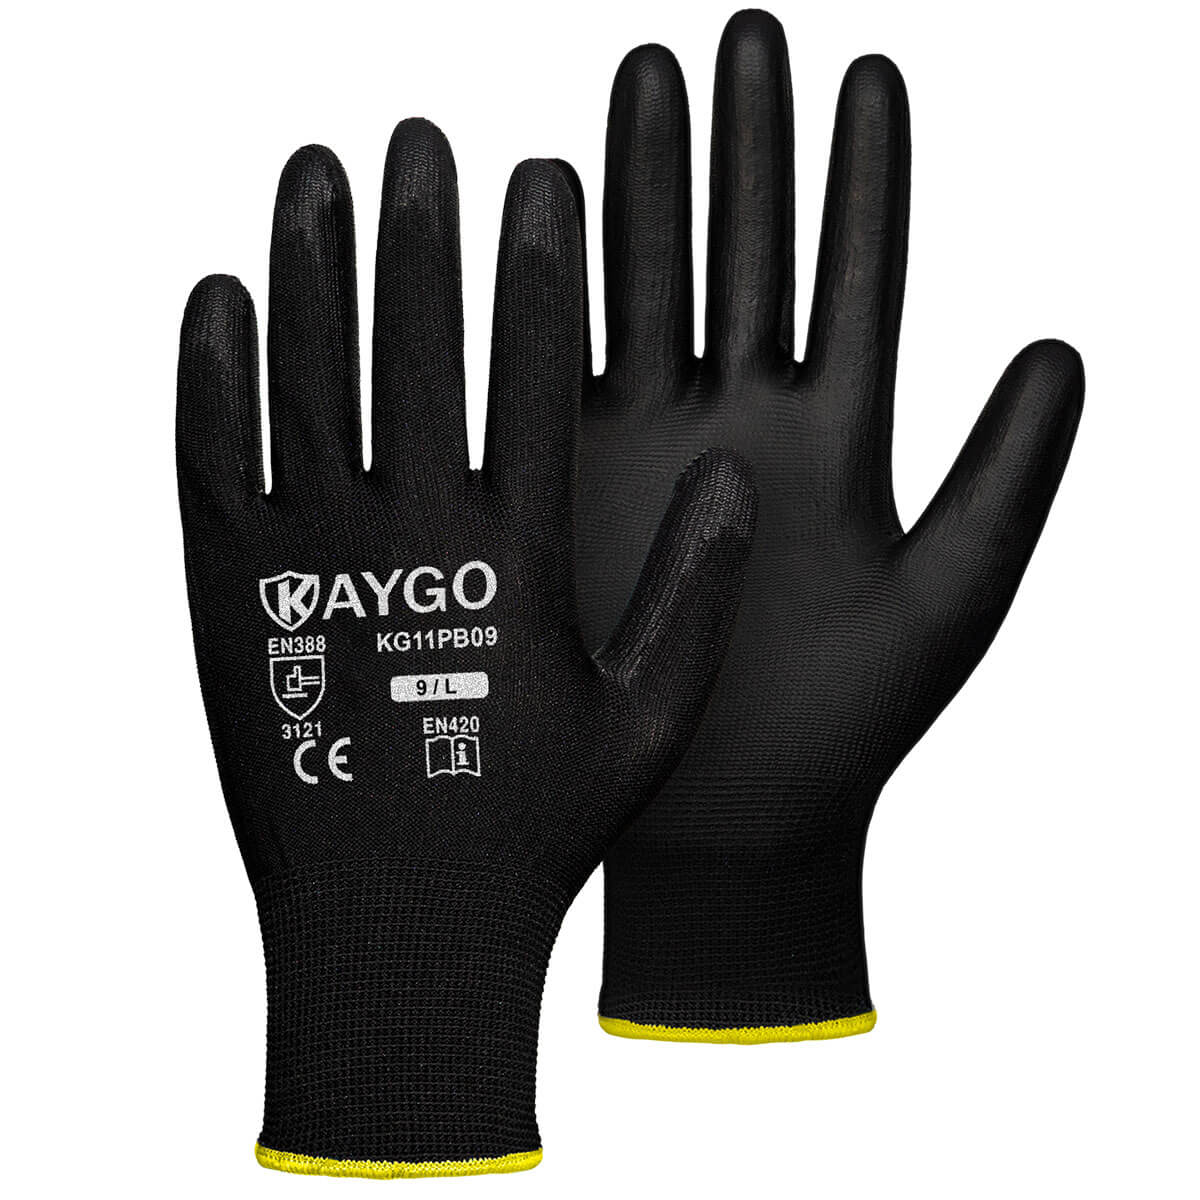 Seamless Knit Polyester Work Gloves with Polyurethane Coated on Palm and Fingers